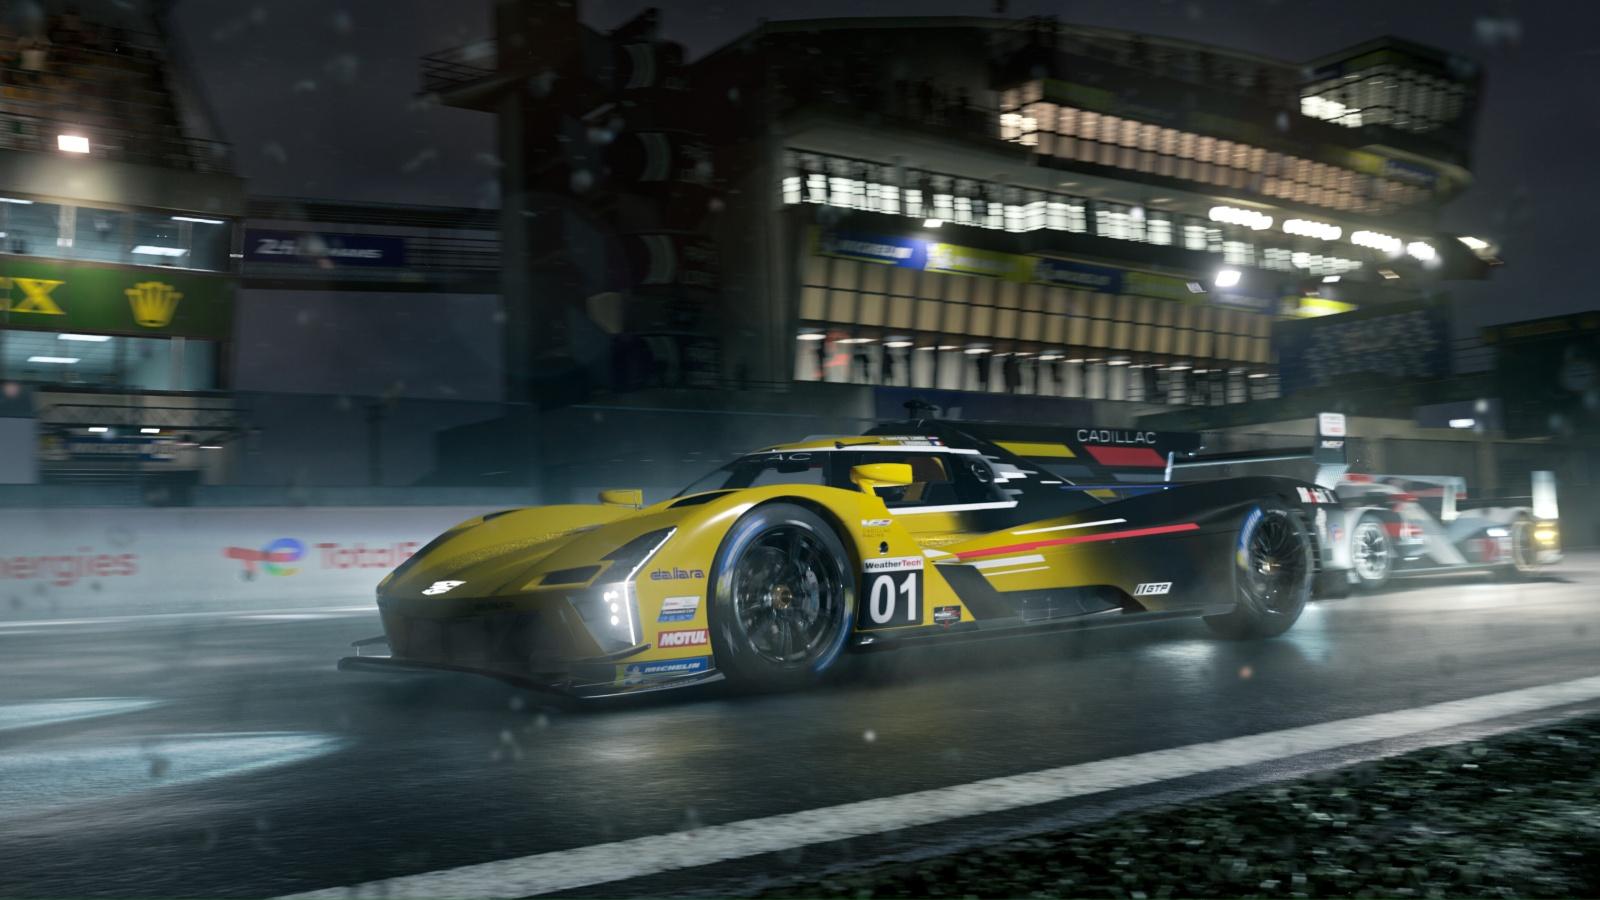 Your New Forza Cover Cars Are the Corvette E-Ray and Cadillac Le Mans  Prototype